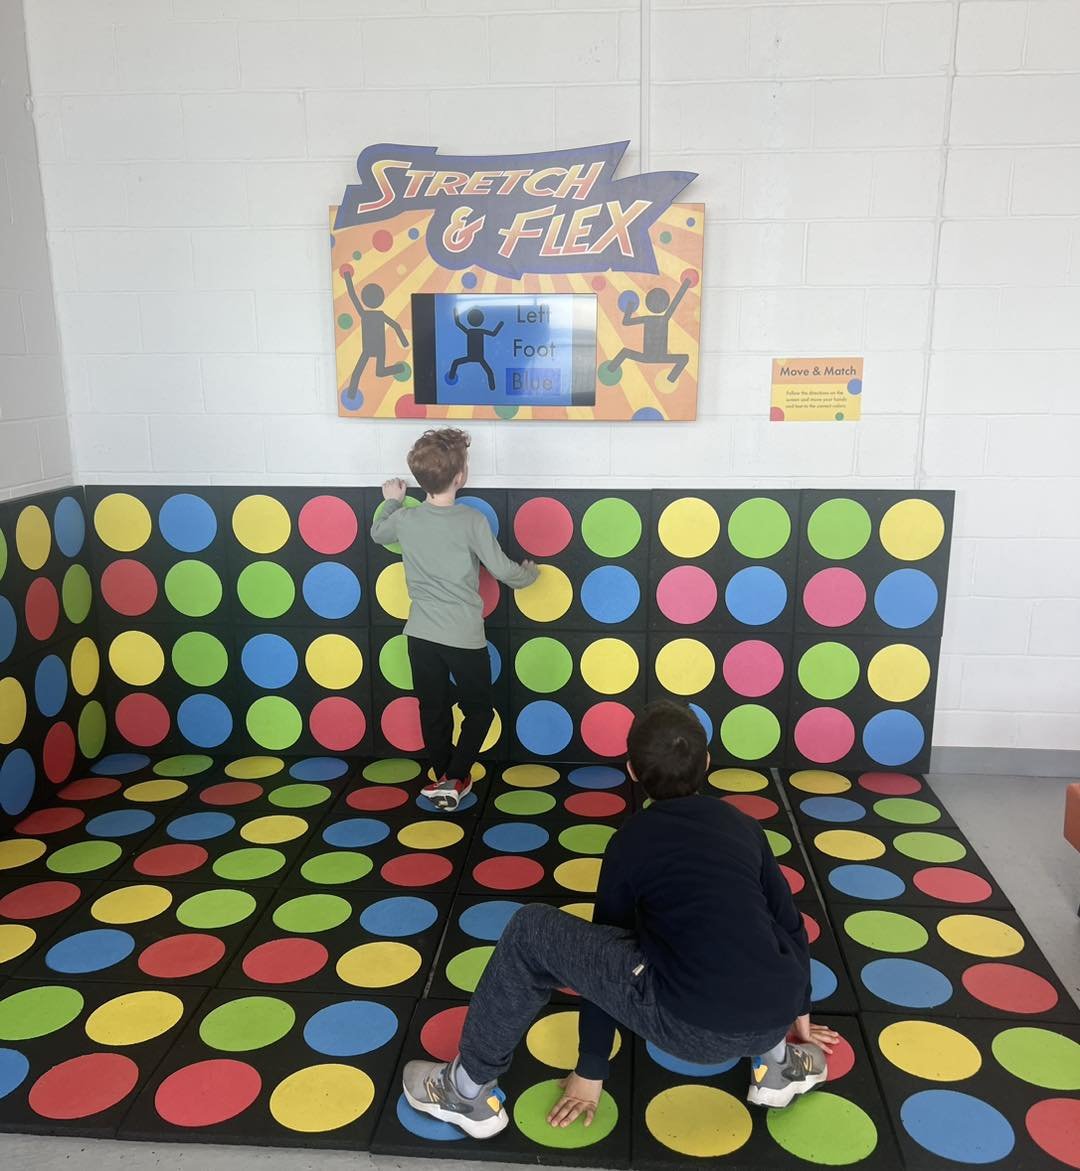 Come test your flexibility at our Stretch &amp; Flex training facility in FIT CITY 🦵🏻💪🏼
.
.

#DiscoverWCM 
#WestchesterChildrensMuseum
#WestchesterFamily
#WestchesterKids
#StemEducation
#PlayToLearn
#ImaginationIsKey
#UseYourImagination
#ThingsTo